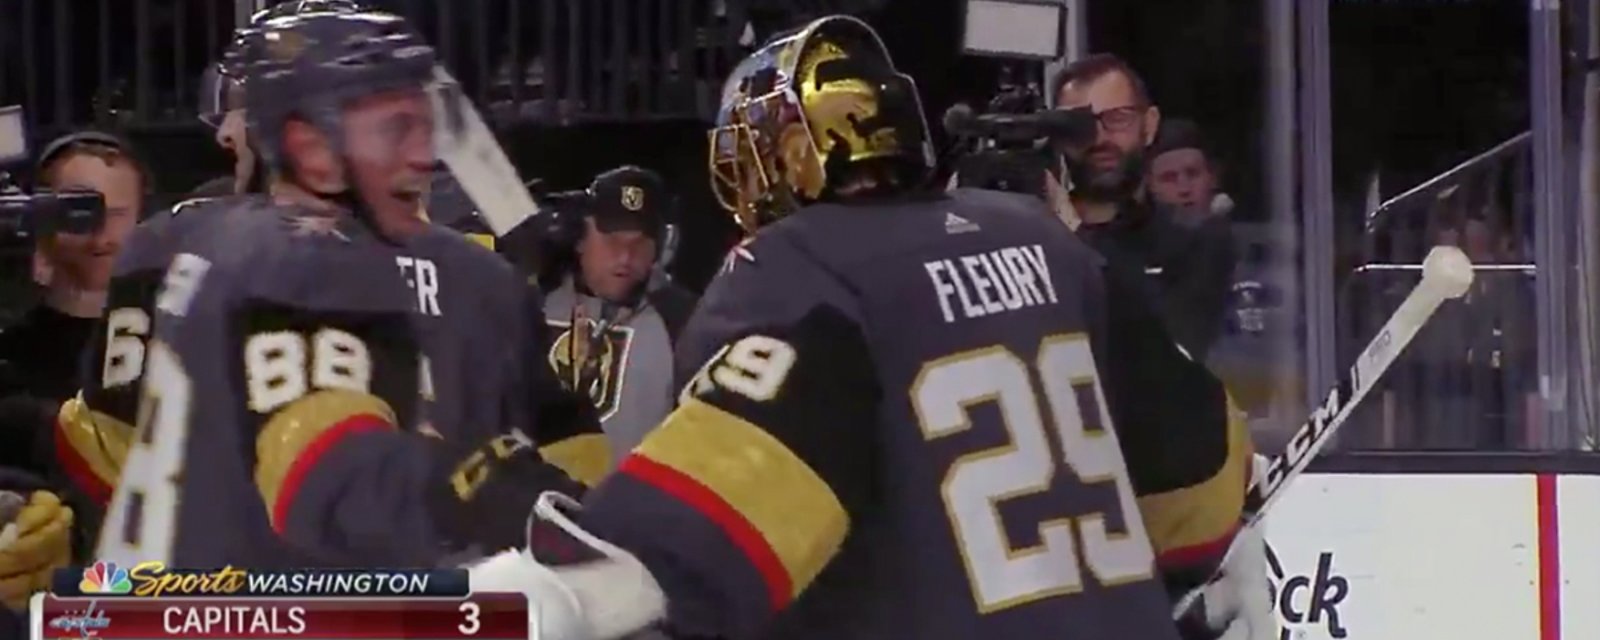 Fleury mocks Kuznetsov’s flying eagle celly after winning Stanley Cup Final rematch 